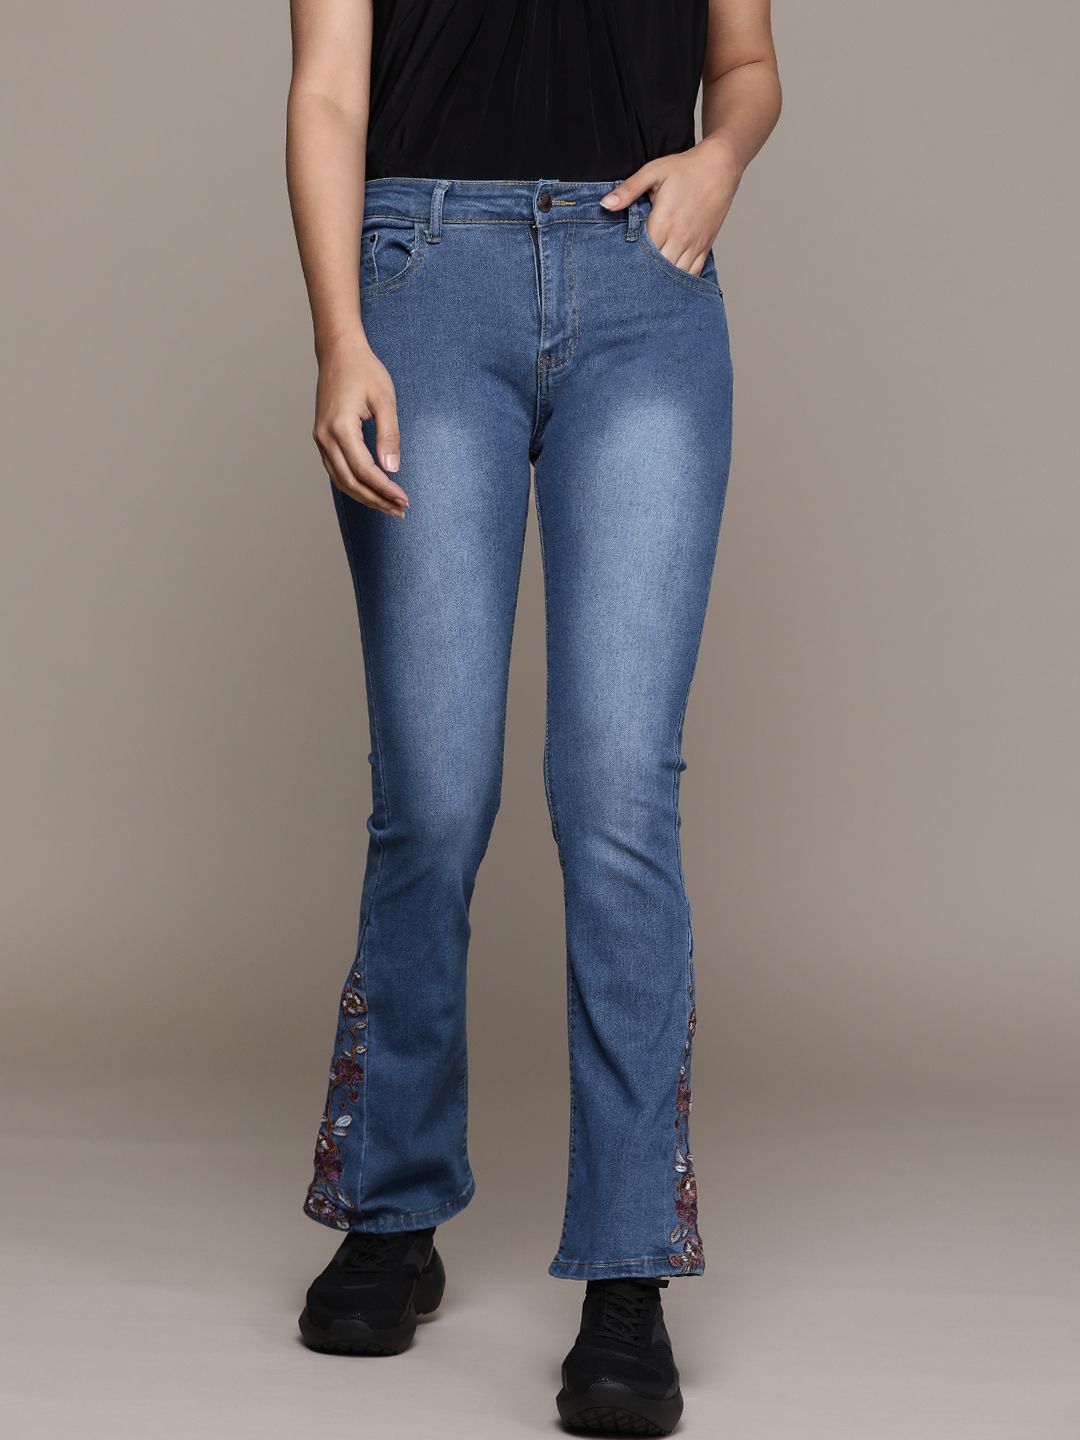 URBANIC Women Blue Pure Cotton High-Rise Light Fade Embroidered Jeans Price in India